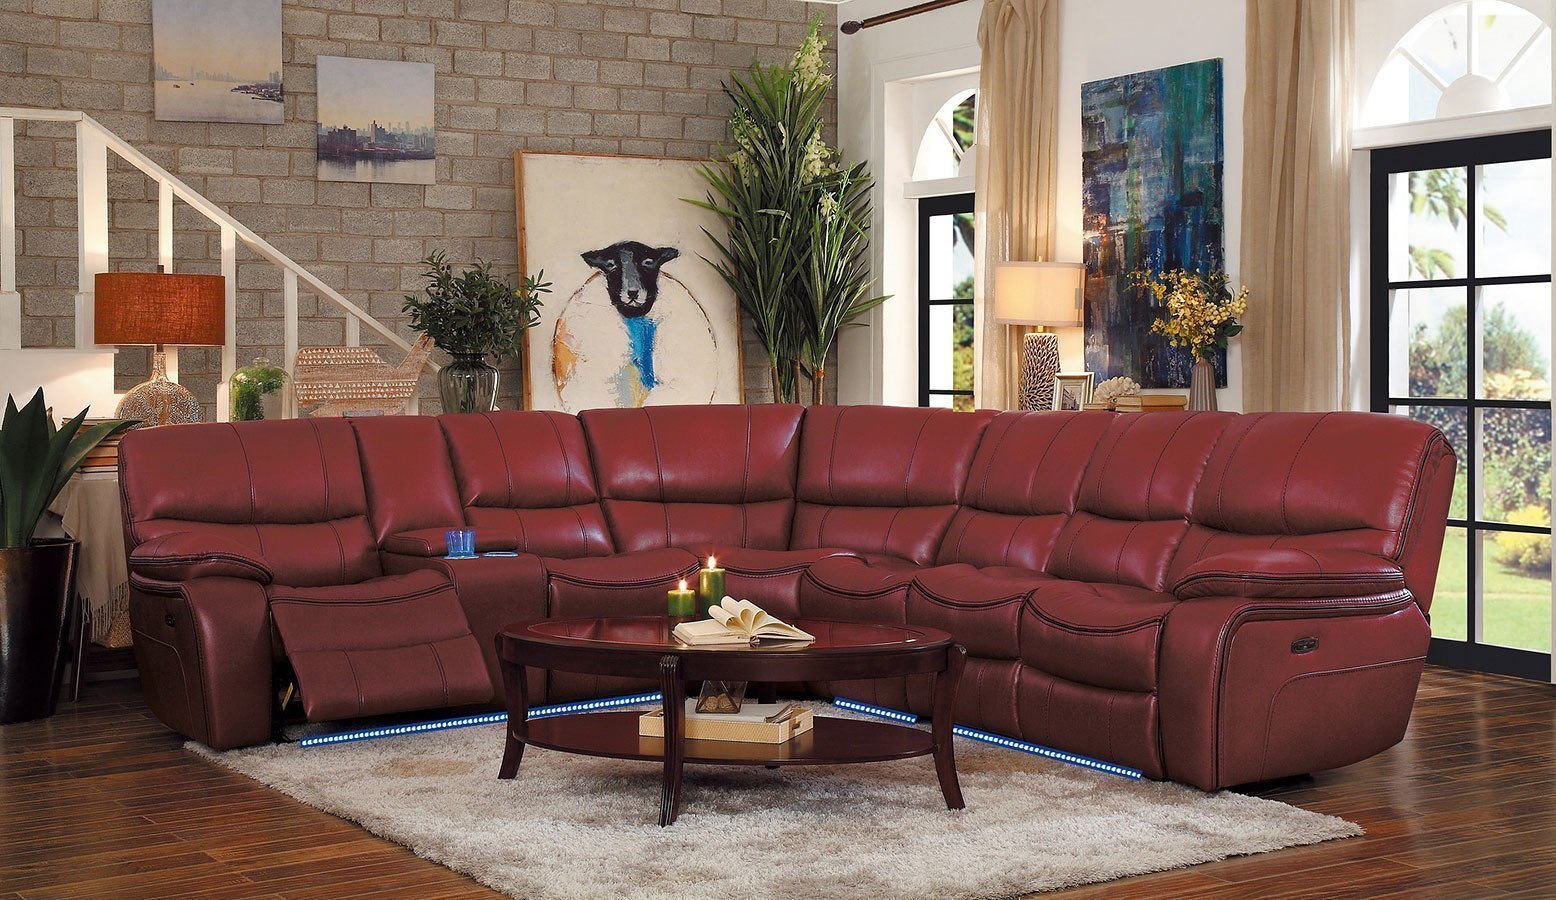 Pecos 4 Piece Power Reclining Sectional W Led Lighting Red Homelegance Furniture Cart